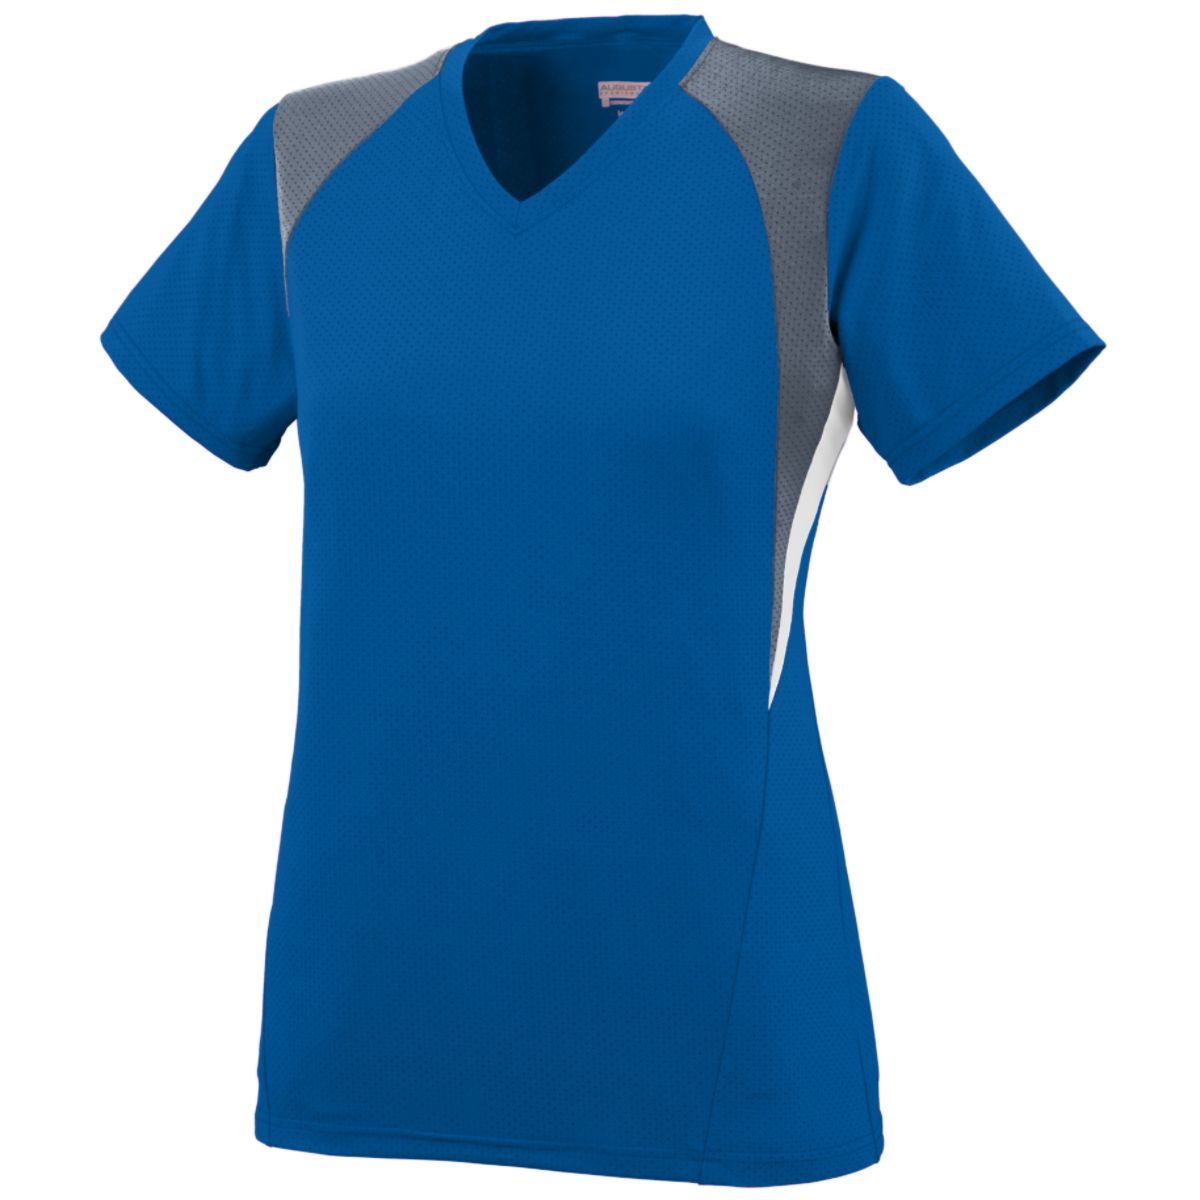 Augusta Sportswear Ladies Mystic Jersey in Royal/Graphite/White  -Part of the Ladies, Ladies-Jersey, Augusta-Products, Soccer, Shirts, All-Sports-1 product lines at KanaleyCreations.com